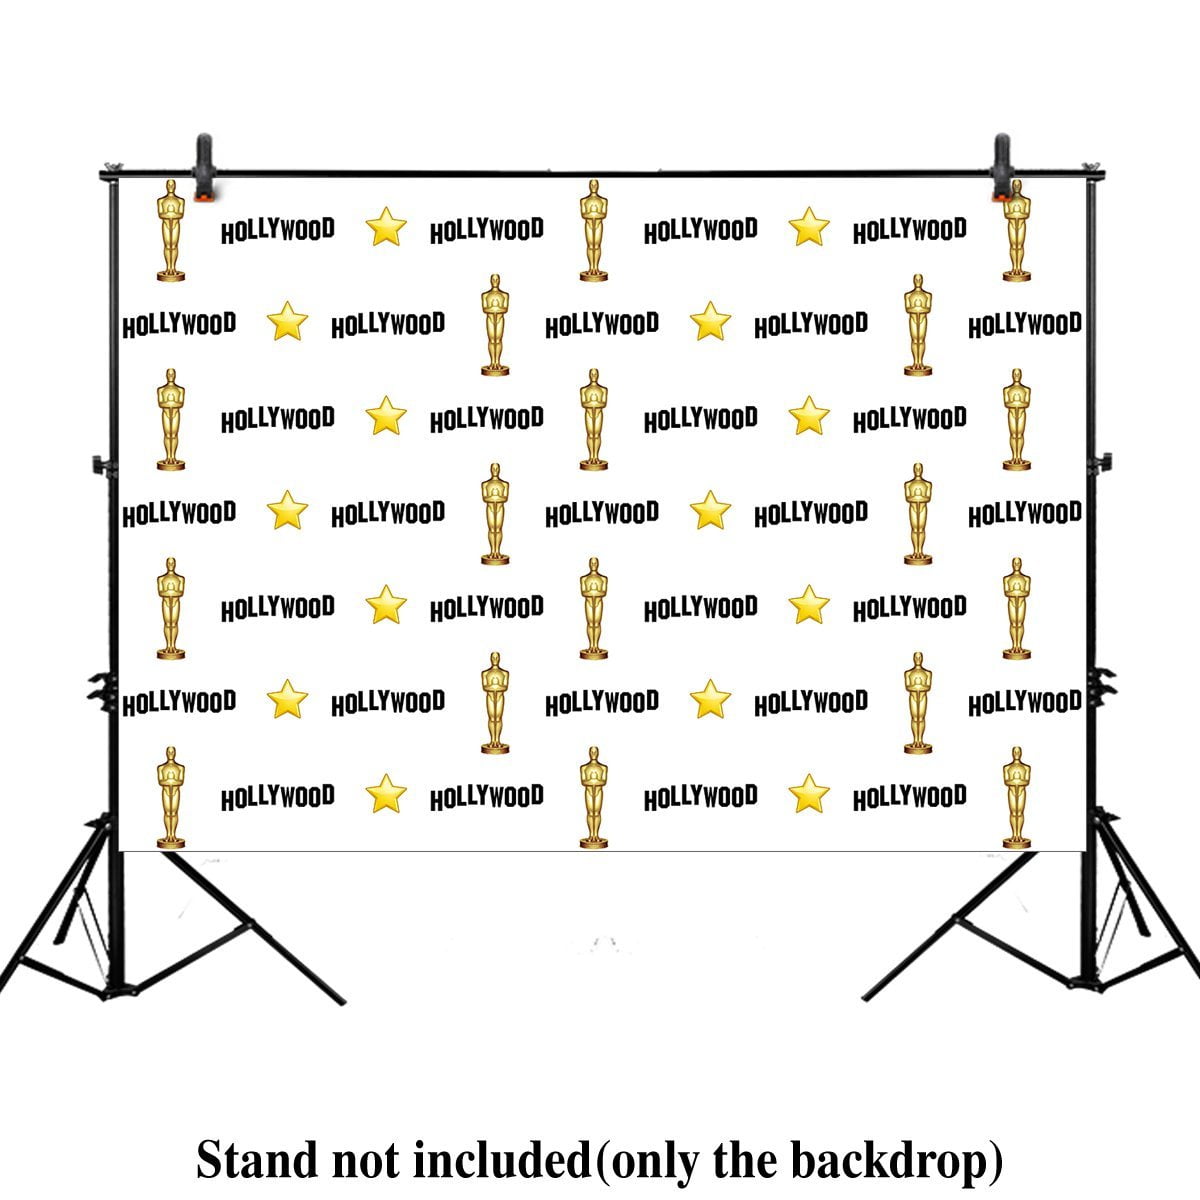 Celebrity Birthday Banner Hollywood Luxury Fabric Photo Backdrop/Hollywood Star Themed Step and Repeat Backdrop for Red Carpet Events Party Backdrop 8x8 ft Top of The line